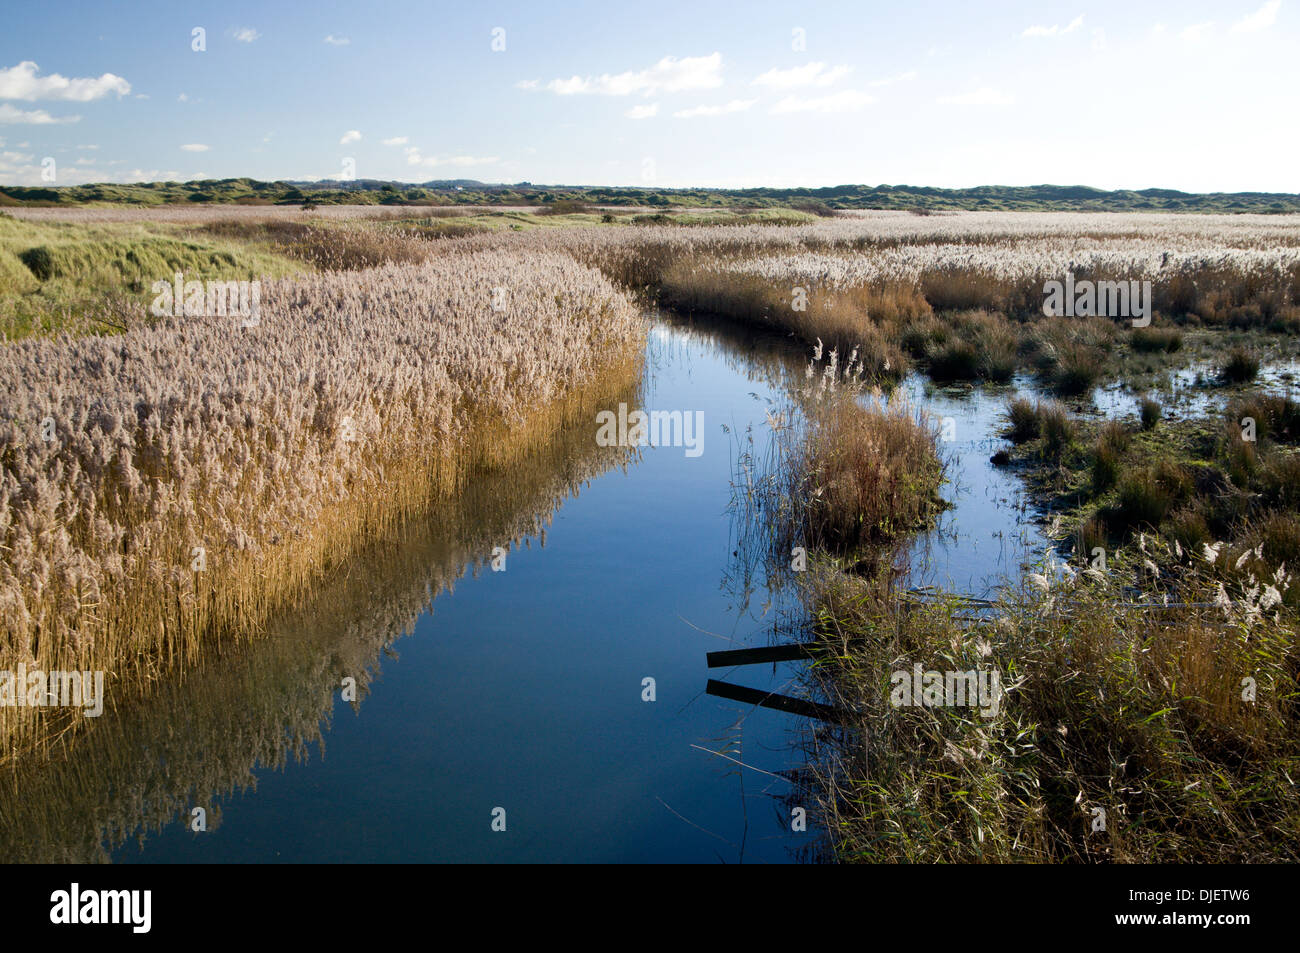 Fiume Kenfig e canneti, Kenfig Riserva Naturale Nazionale vicino a Port Talbot, Galles del Sud. Foto Stock